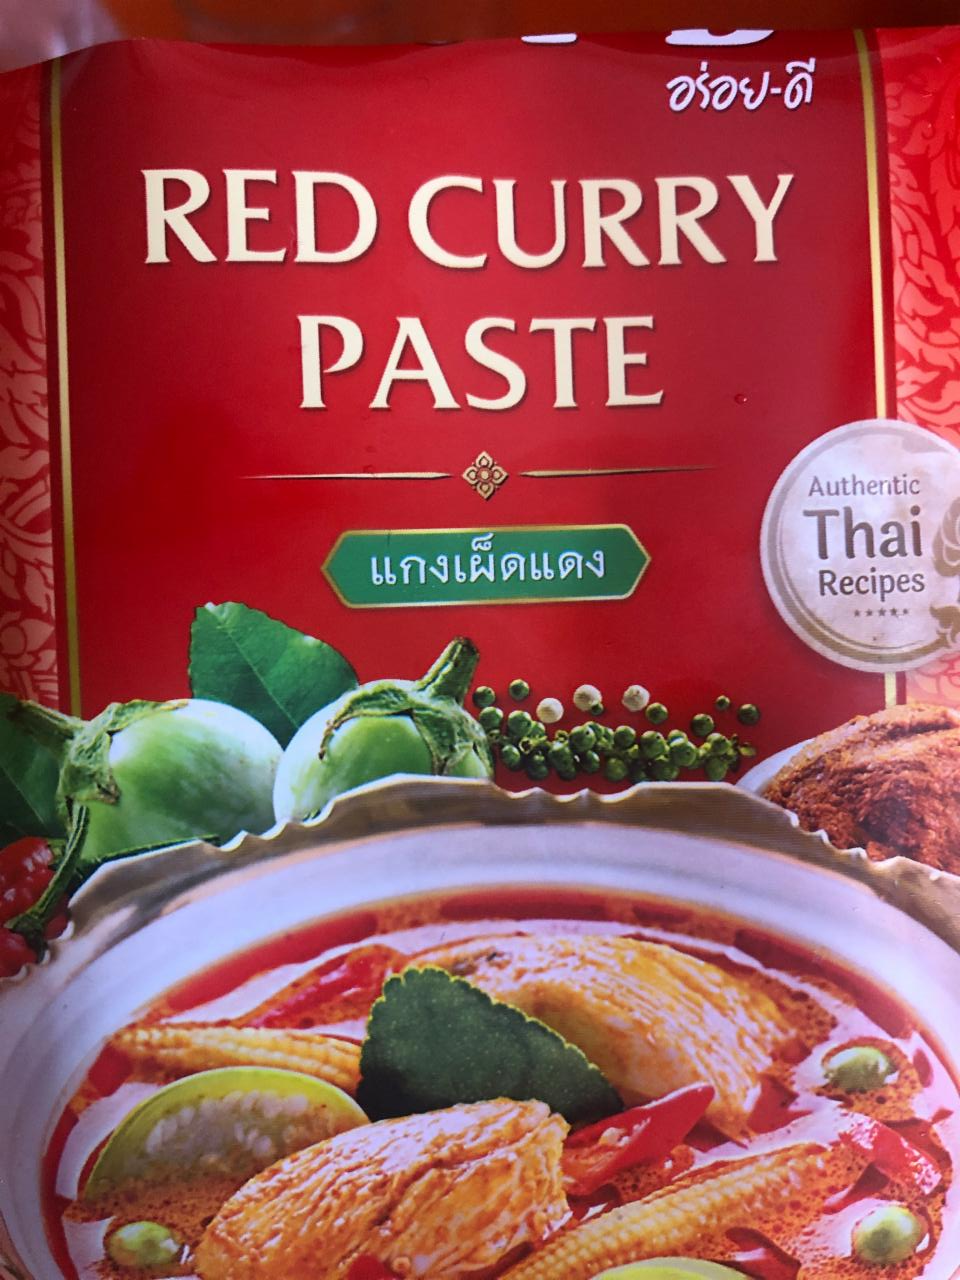 Fotografie - Red curry paste Aroy D